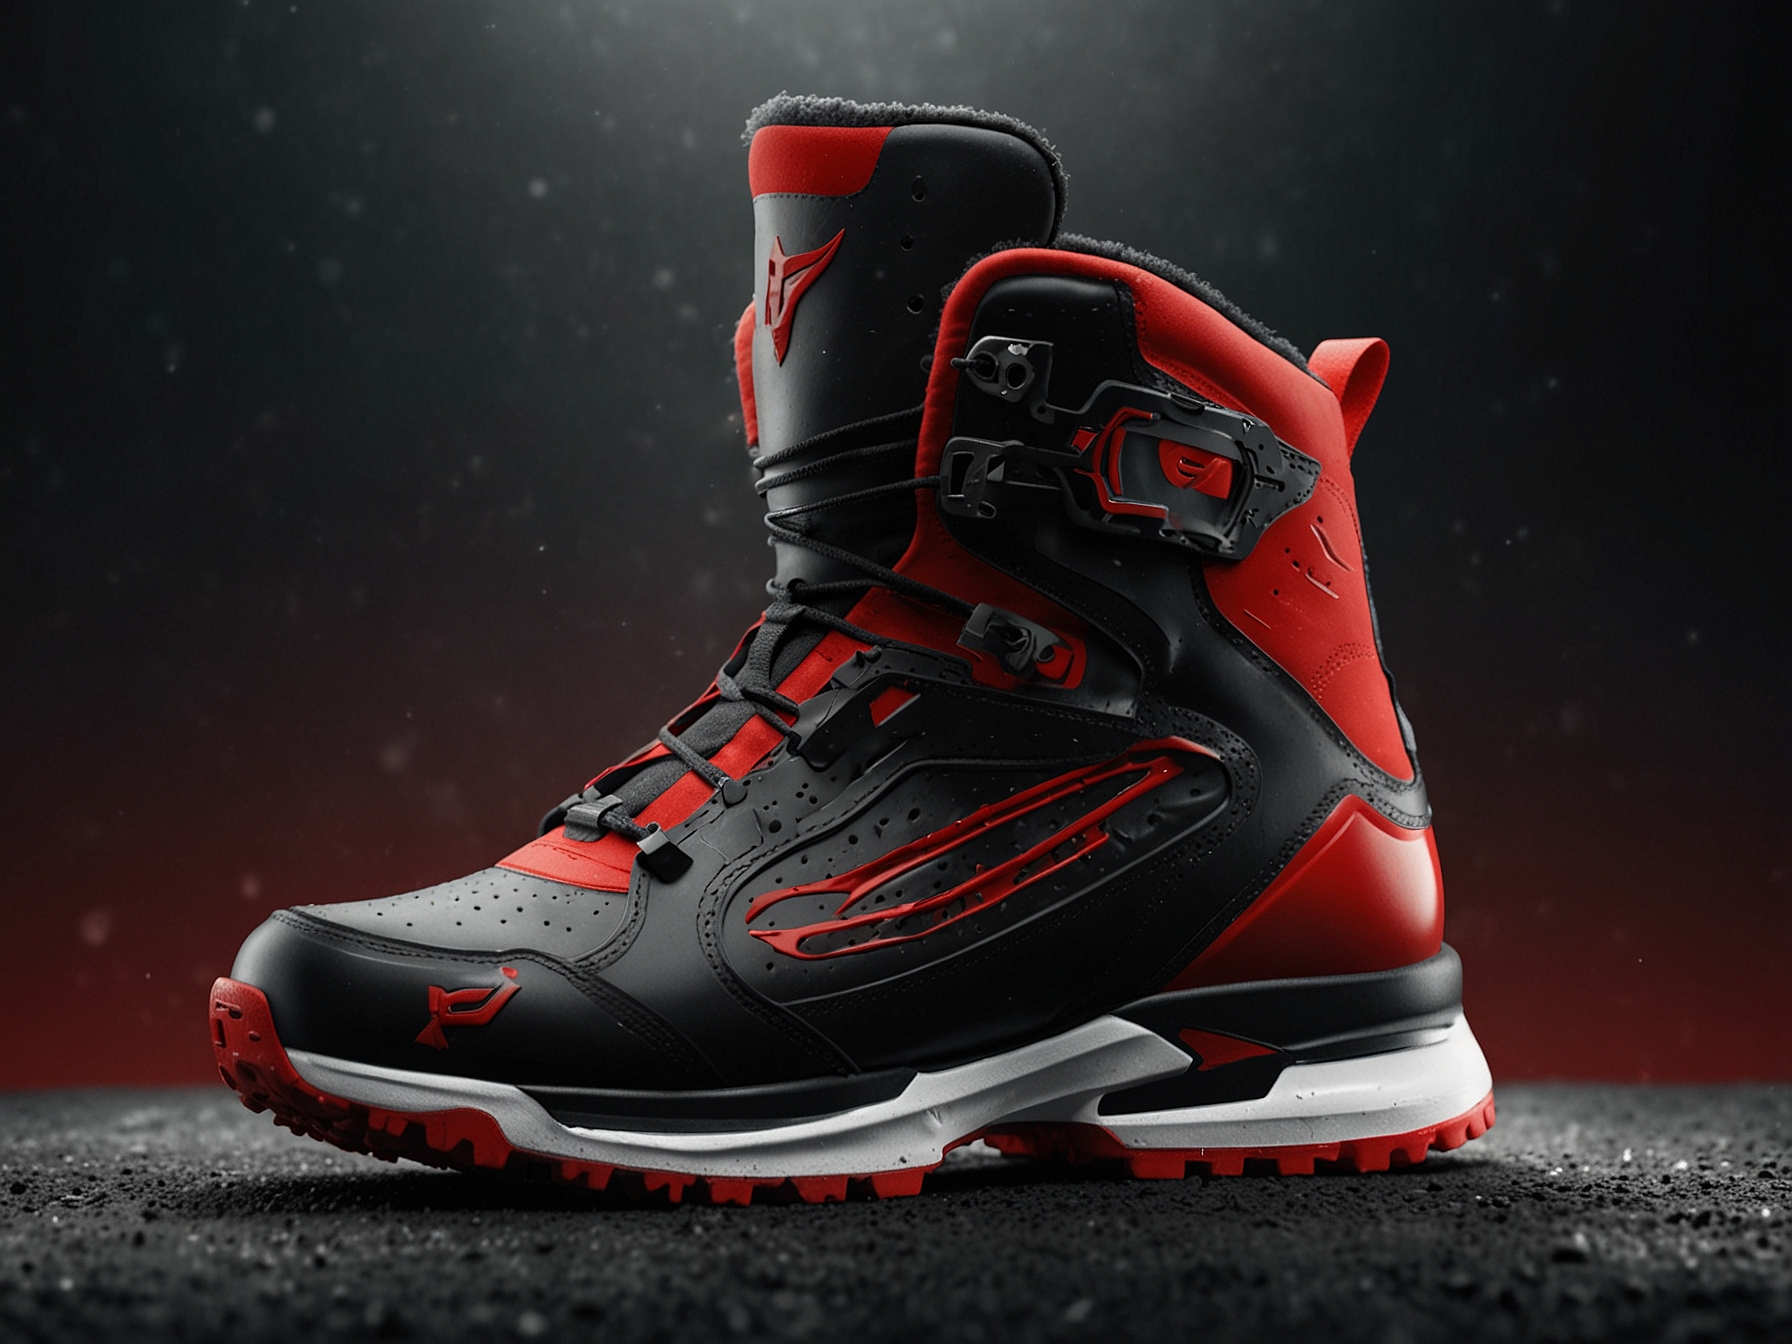 The SNOWCROSS sneaker, with exaggerated ankle and wing accents, shown in striking black and red colorways. The foreground highlights the XT-6, available in high-top and low-top versions, showcasing deconstructed uppers with leather, zippers, and button details.